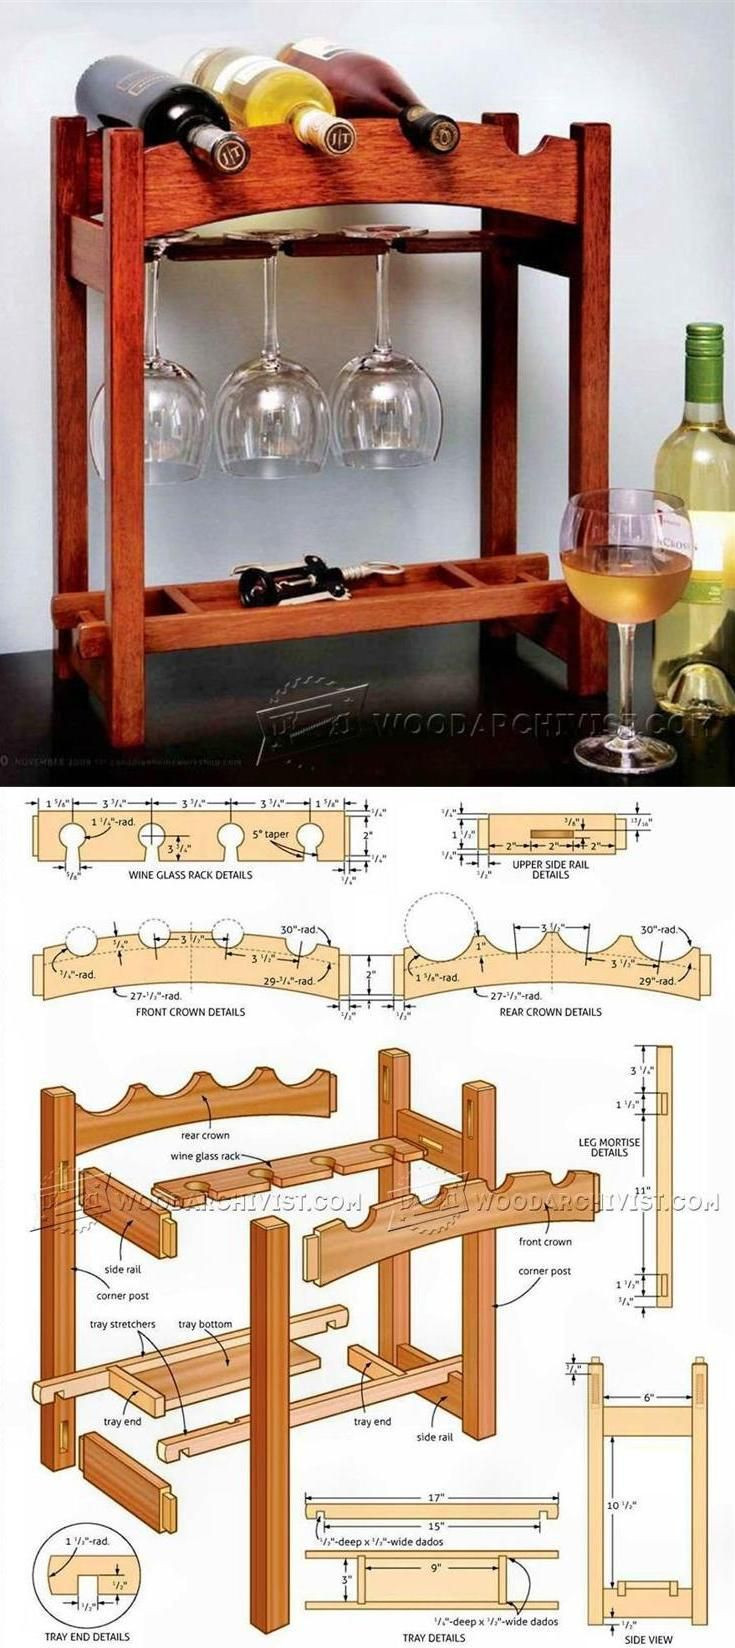 Small DIY Wood Projects
 17 Best ideas about Woodworking Projects on Pinterest